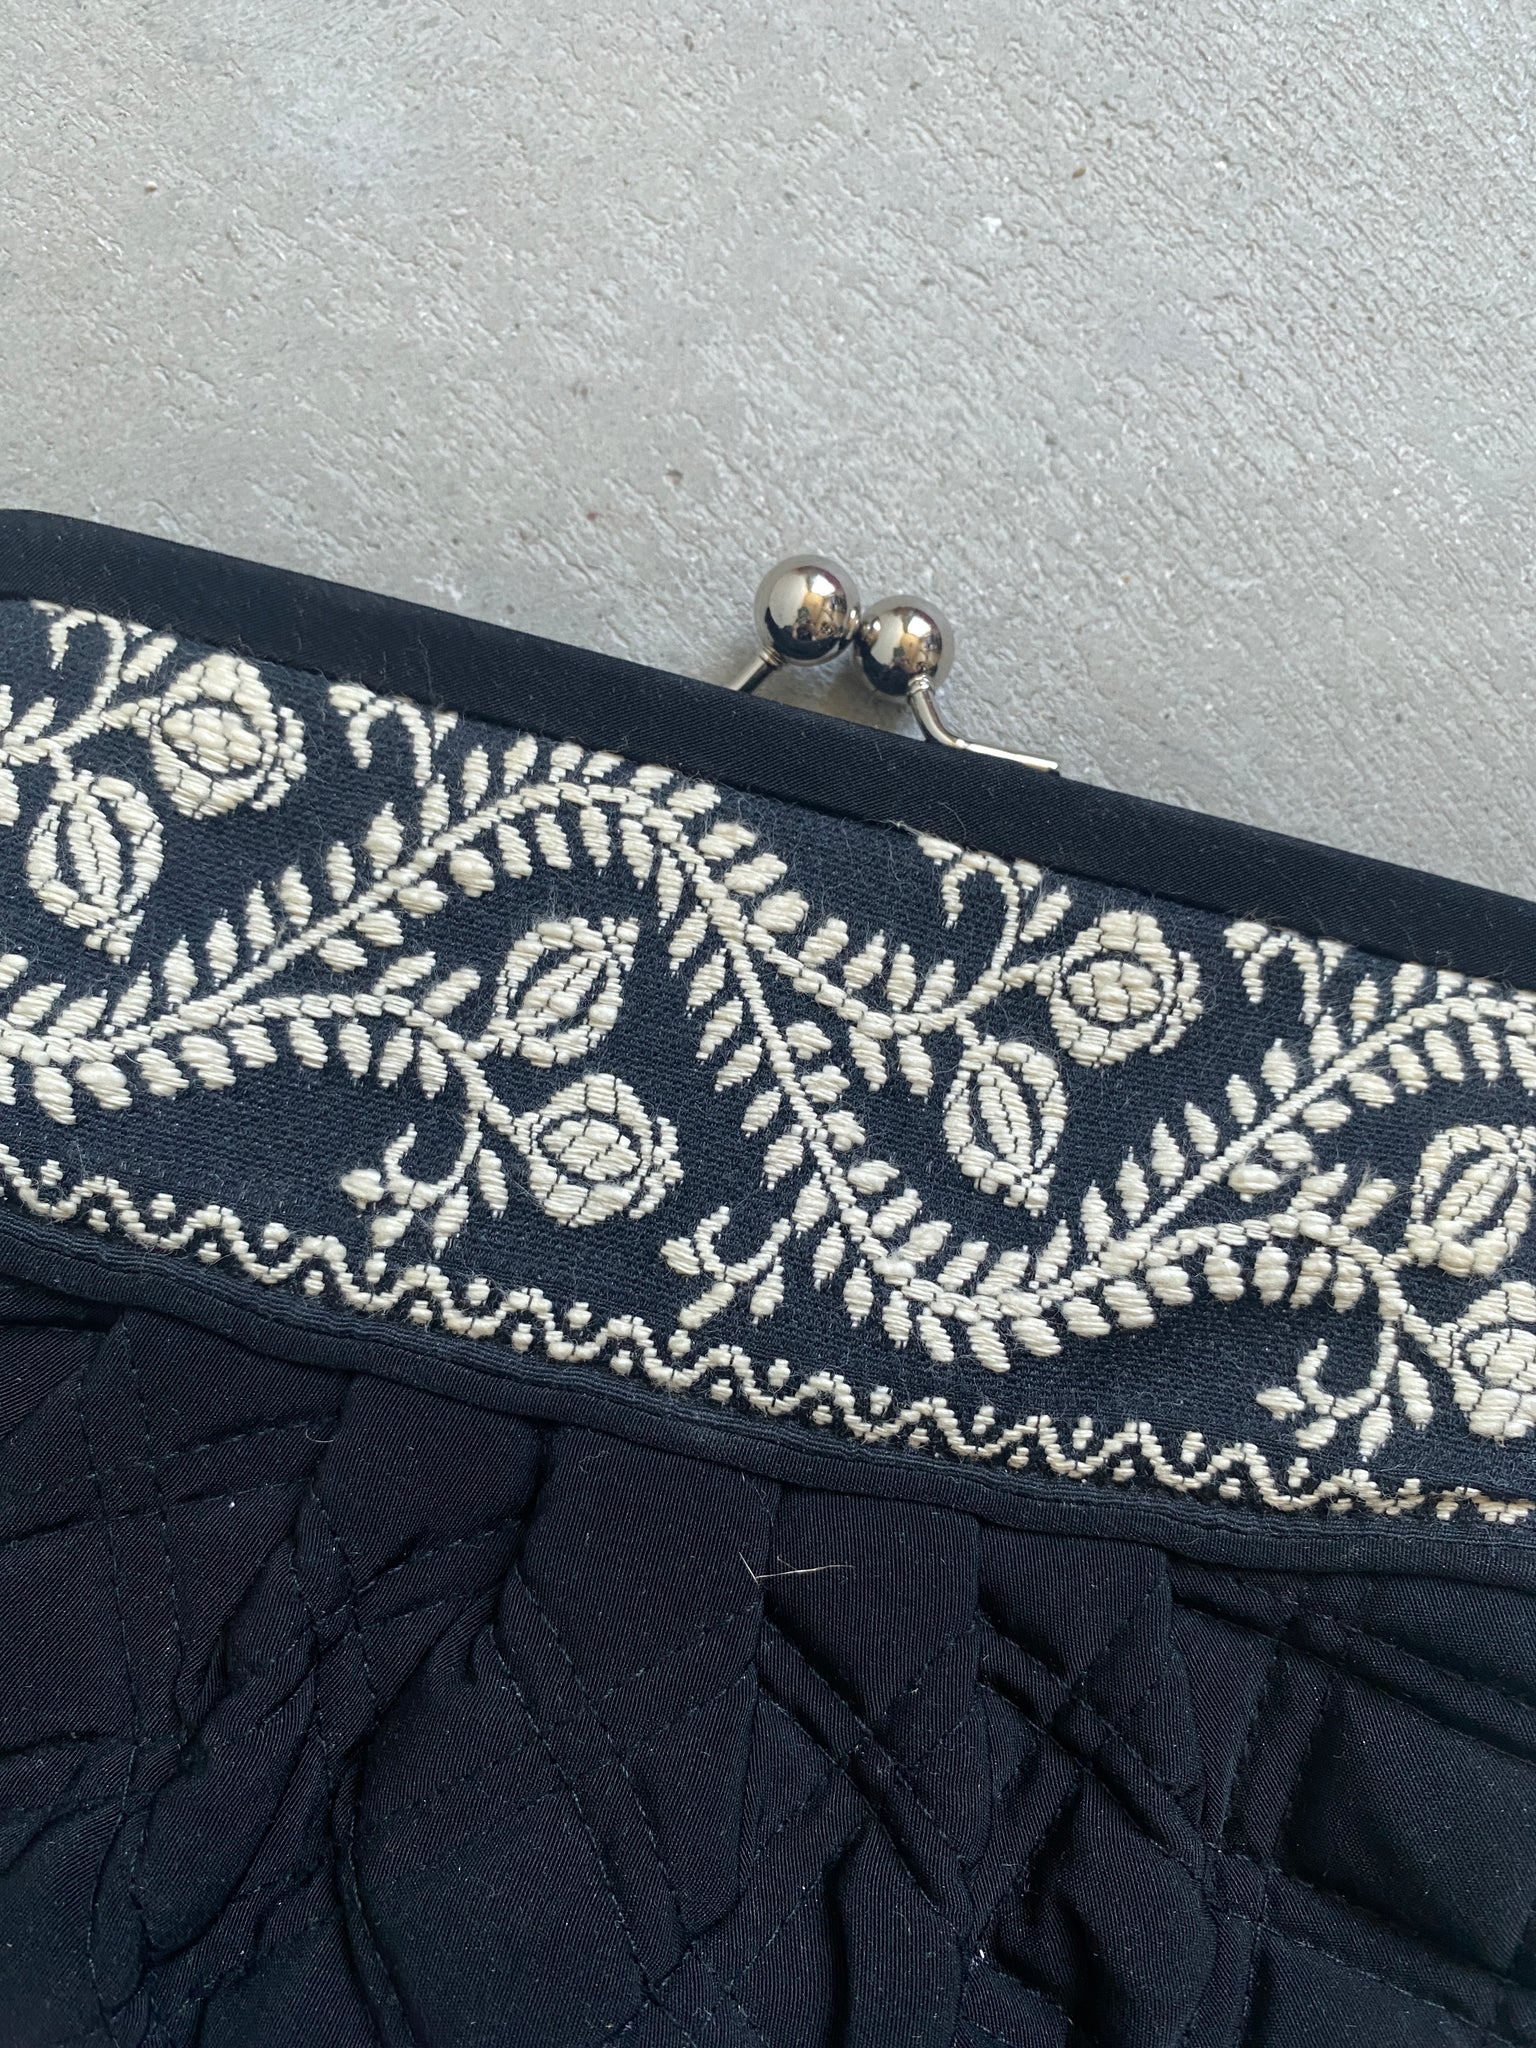 Vera Bradley Small Quilted and Embroidered Black Bag